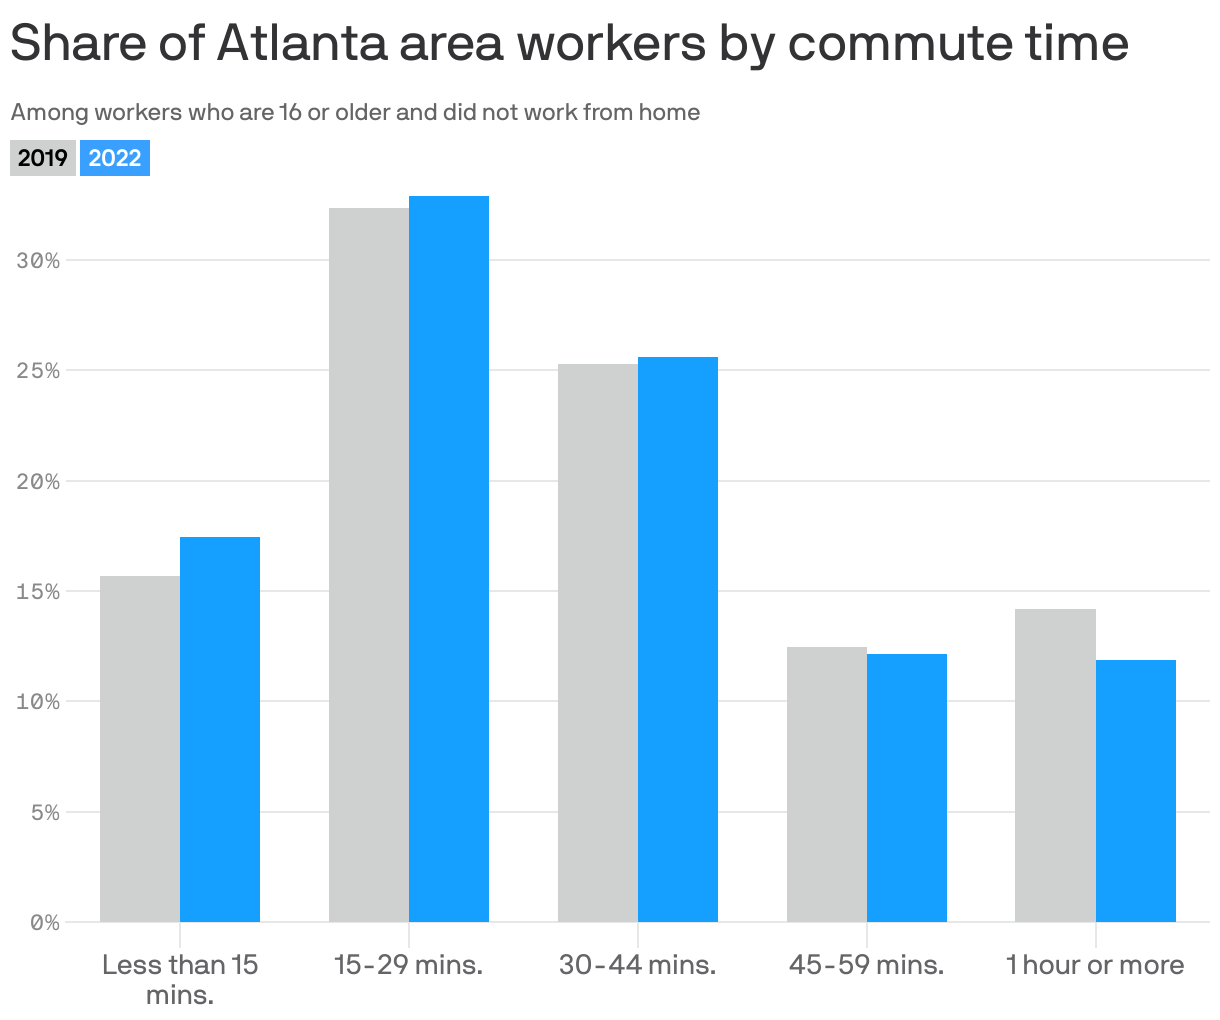 Share of Atlanta area workers by commute time